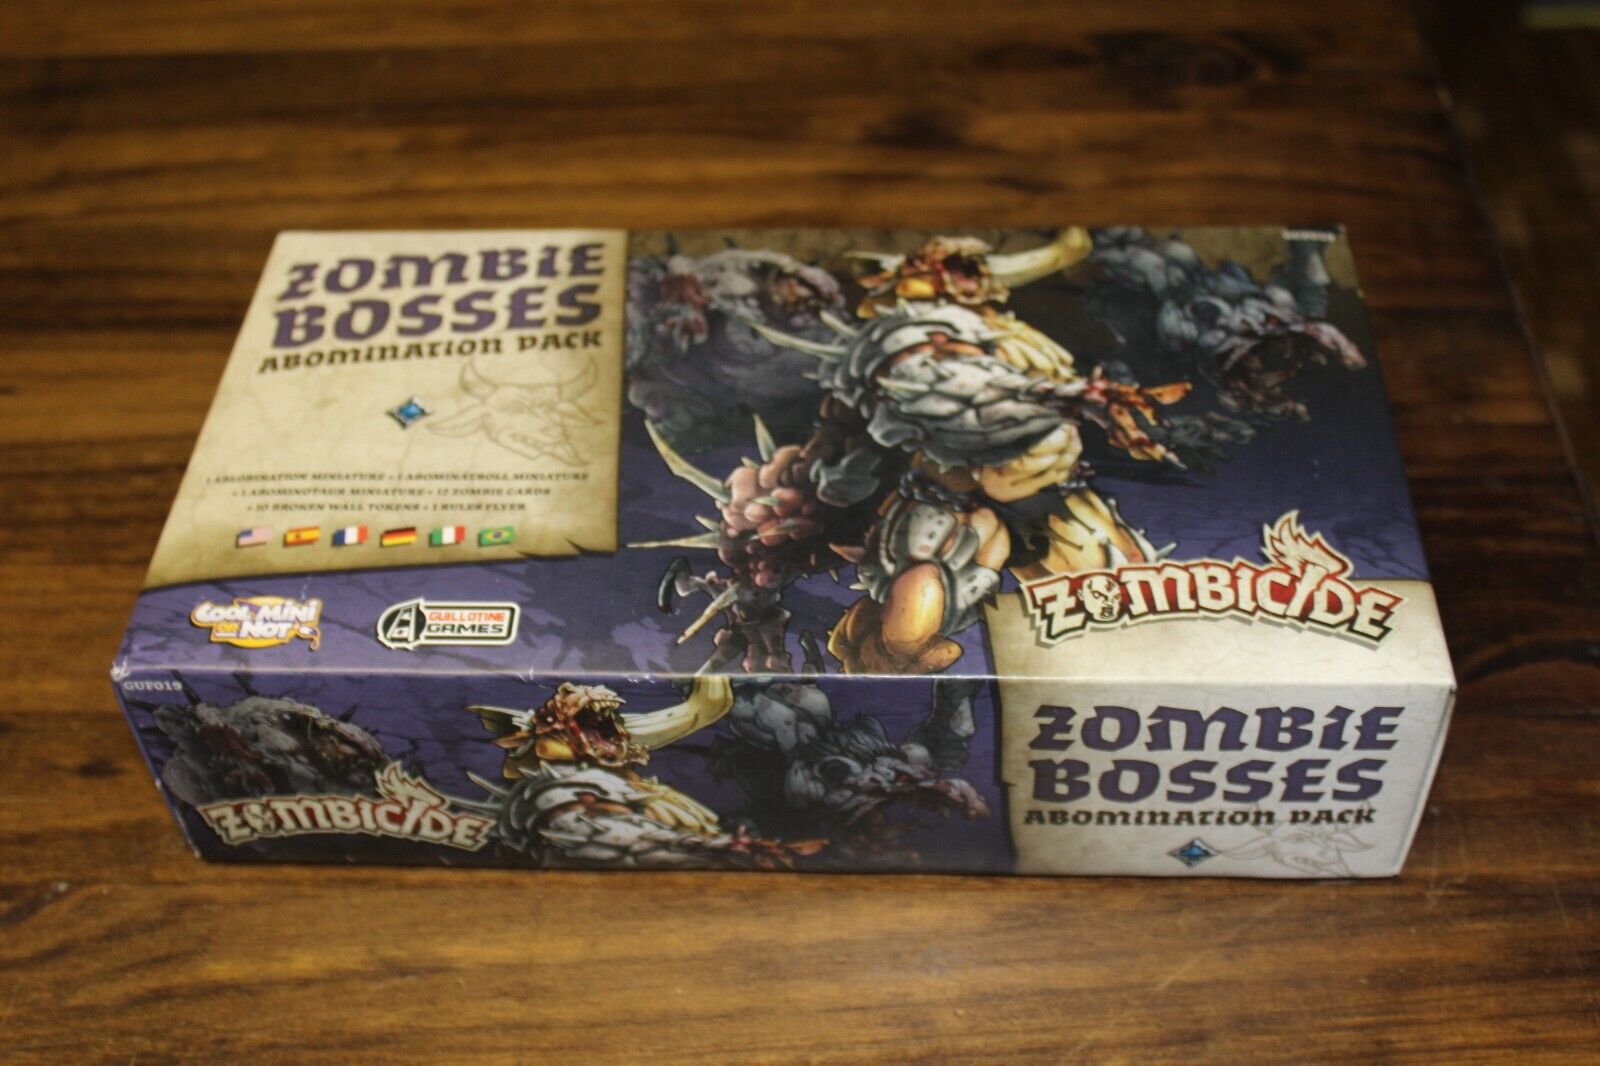 Zombicide Zombie Bosses Abomination Pack New Open Box